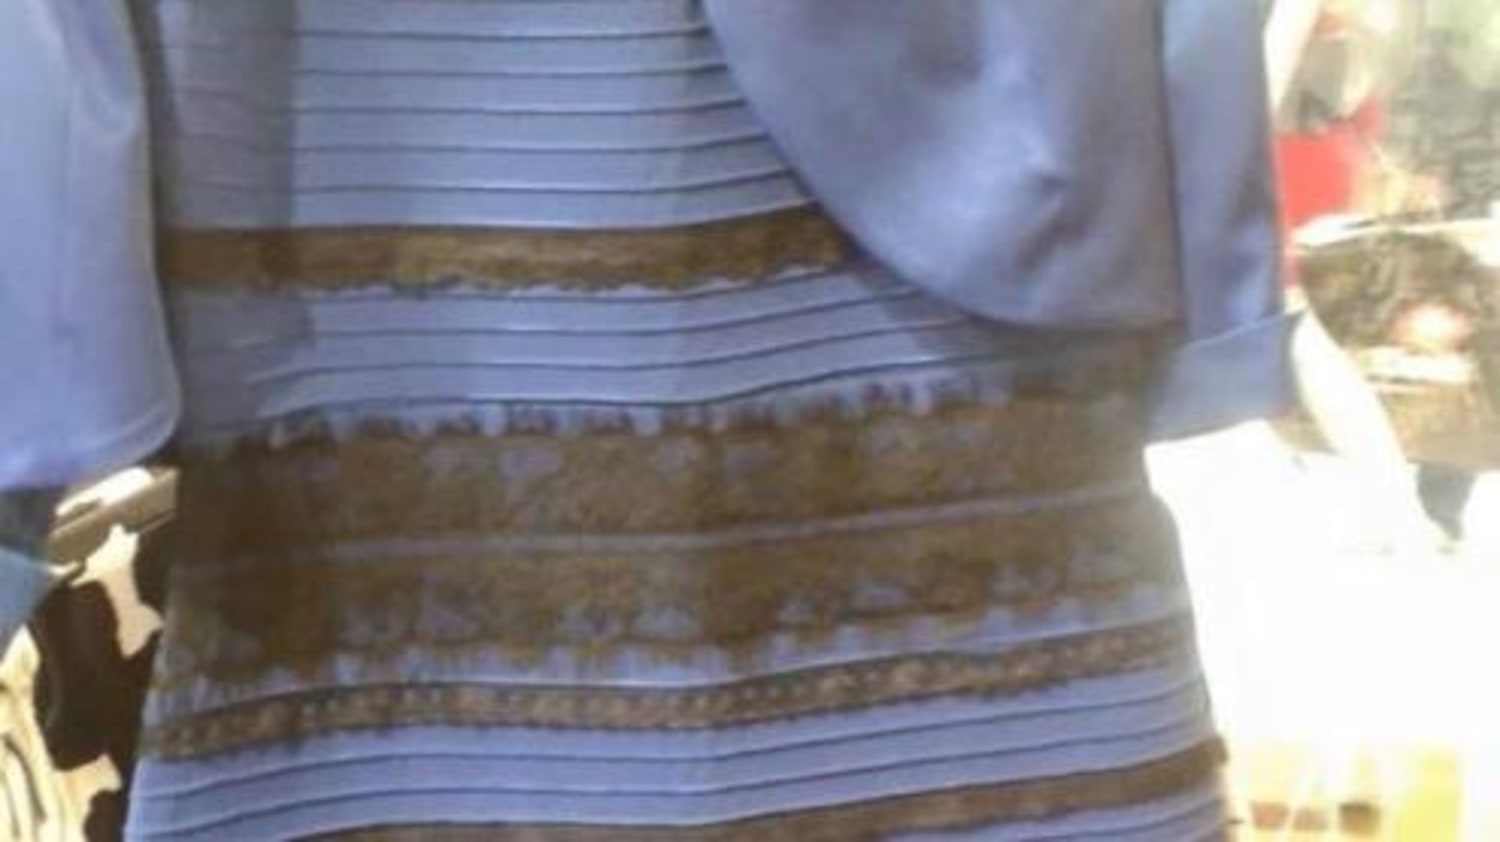 The dress is black & blue, but here's why you can't tell - TJ Kelly